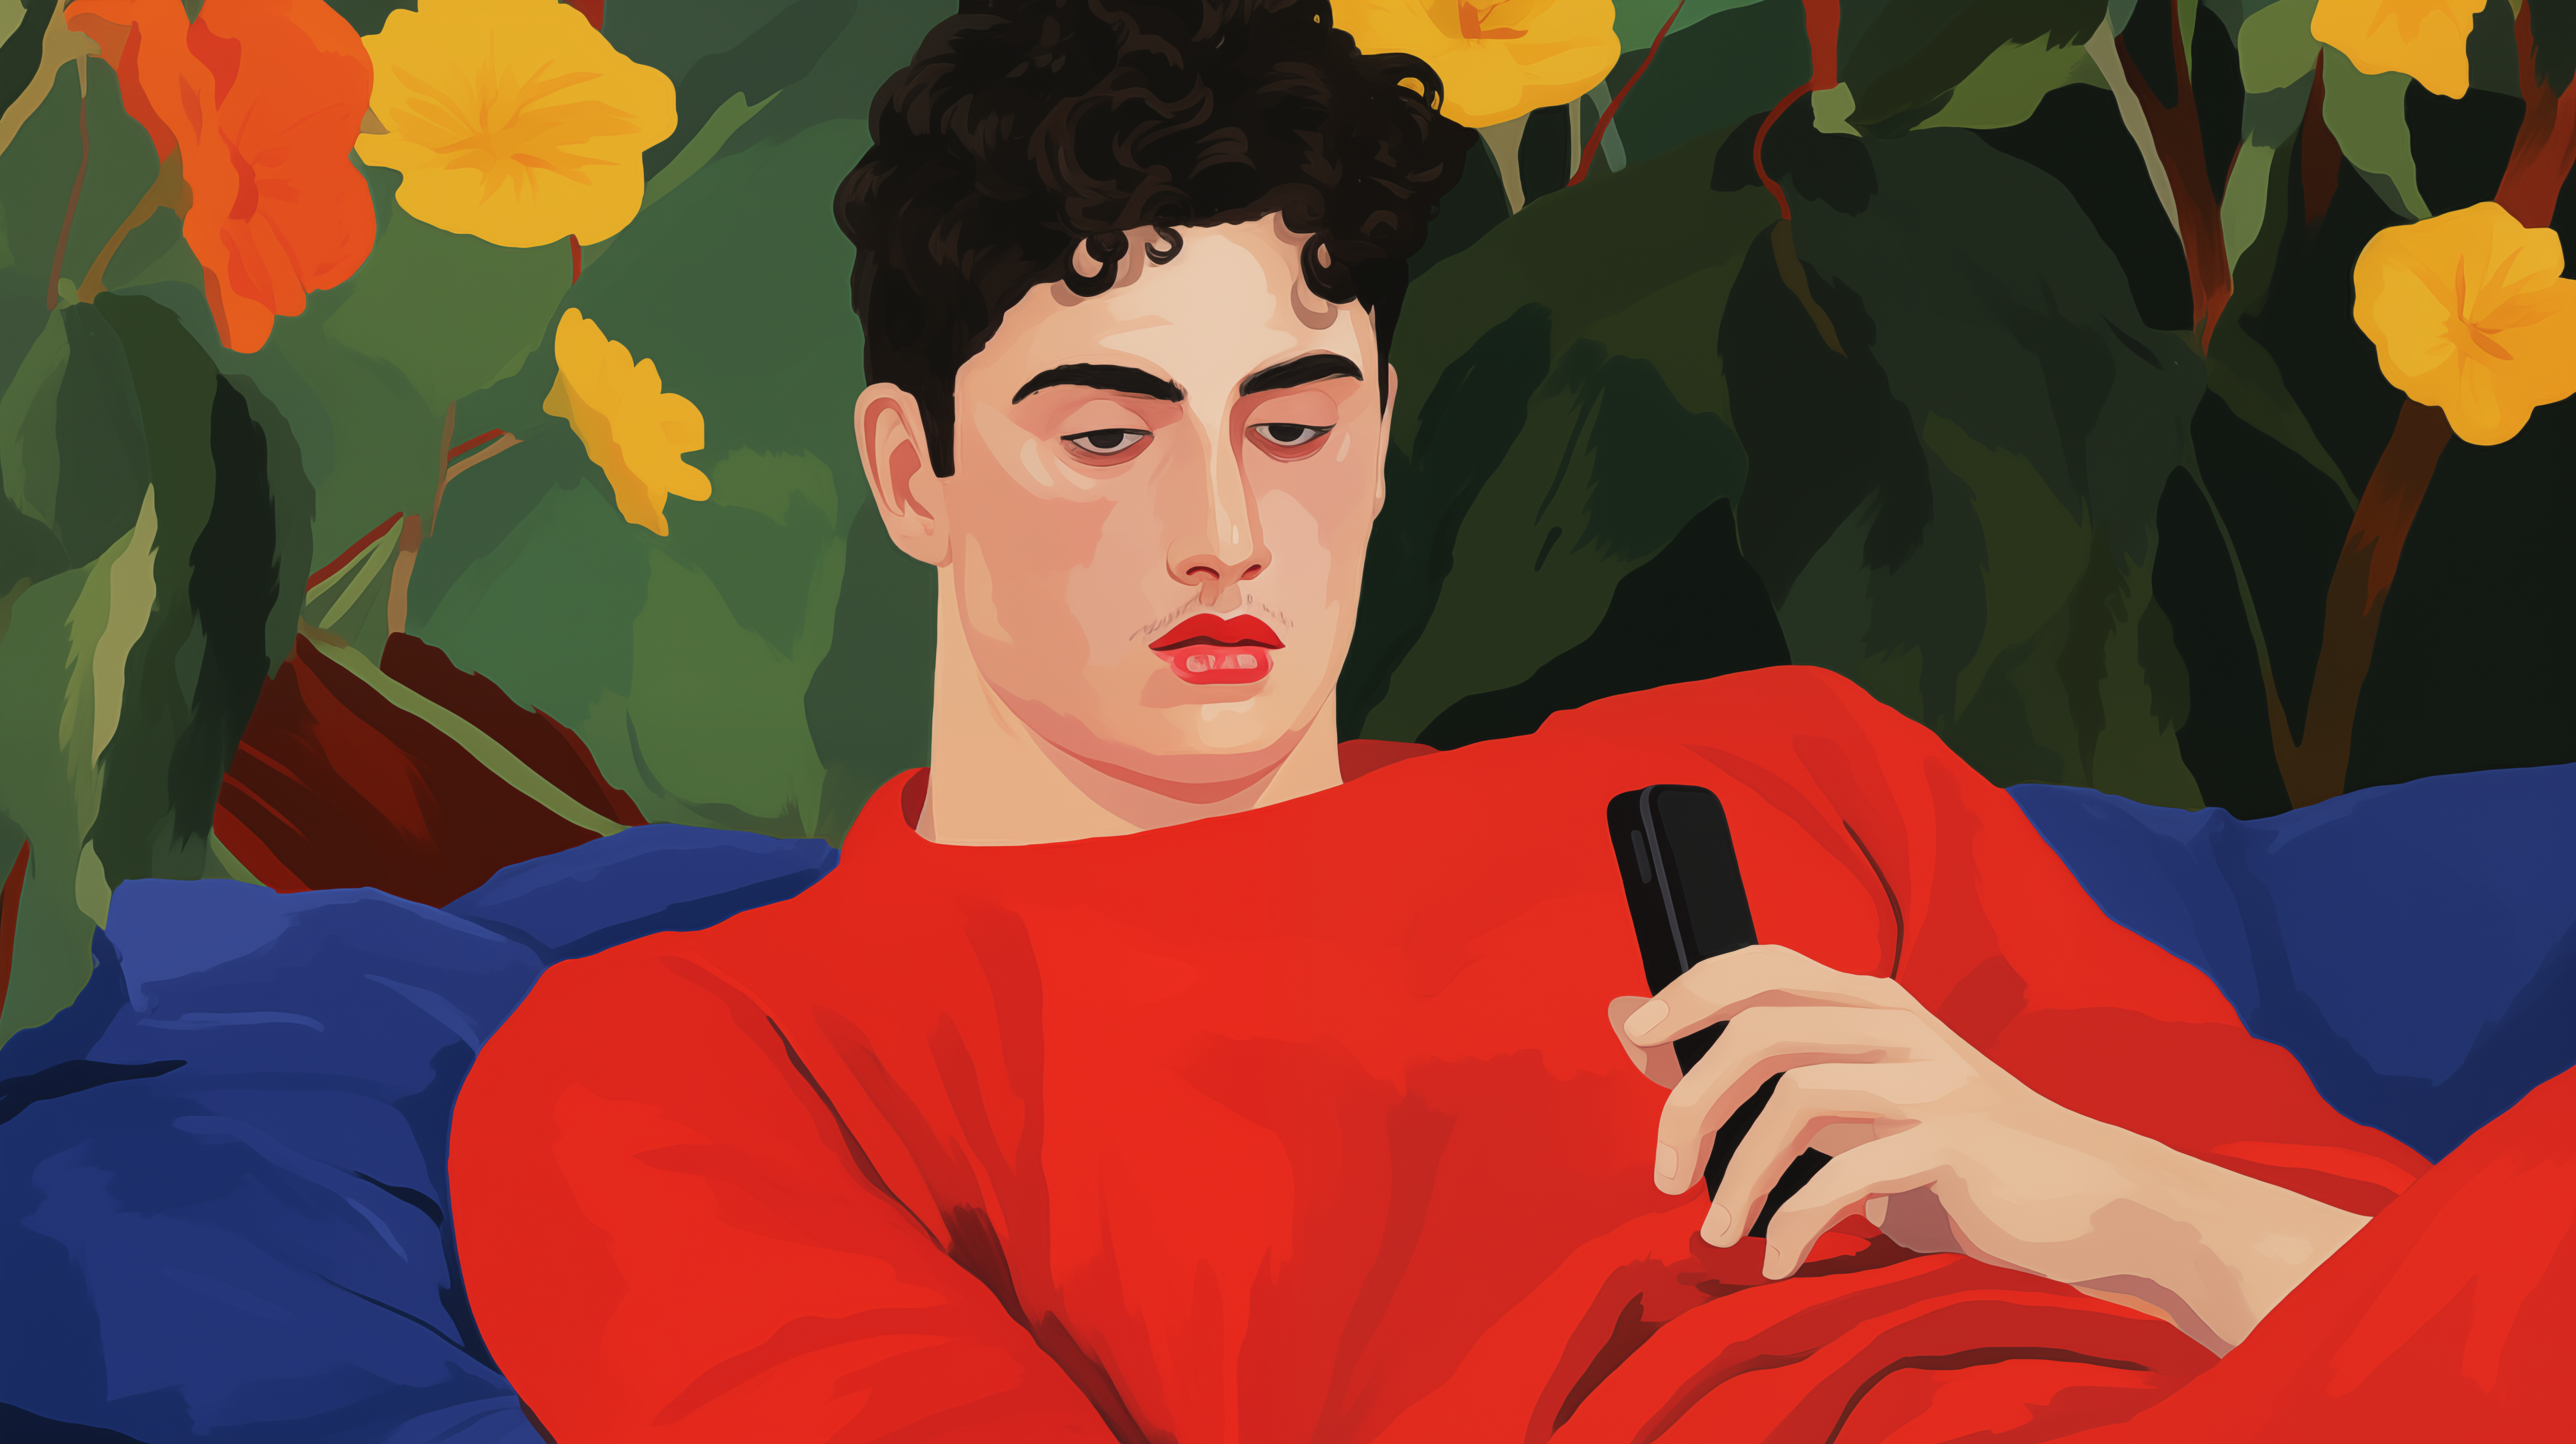 srx_0_illustration_of_a_young_man_watching_his_phone_-no_pink__24ce7c9f-e5b8-40c1-b640-a0c49f96502c